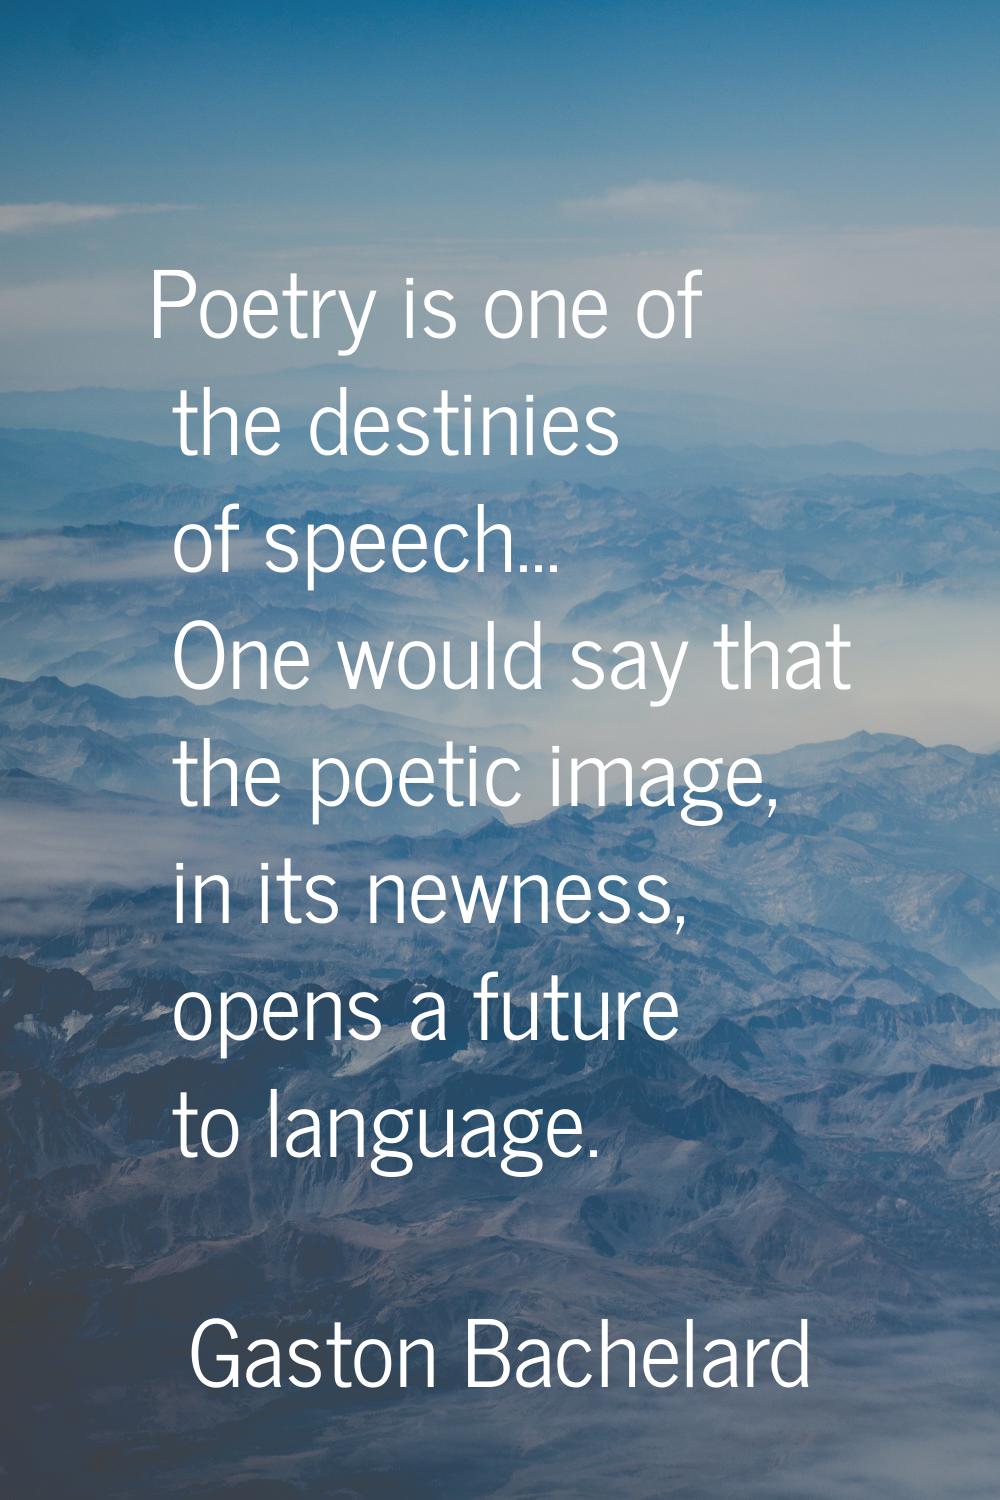 Poetry is one of the destinies of speech... One would say that the poetic image, in its newness, op